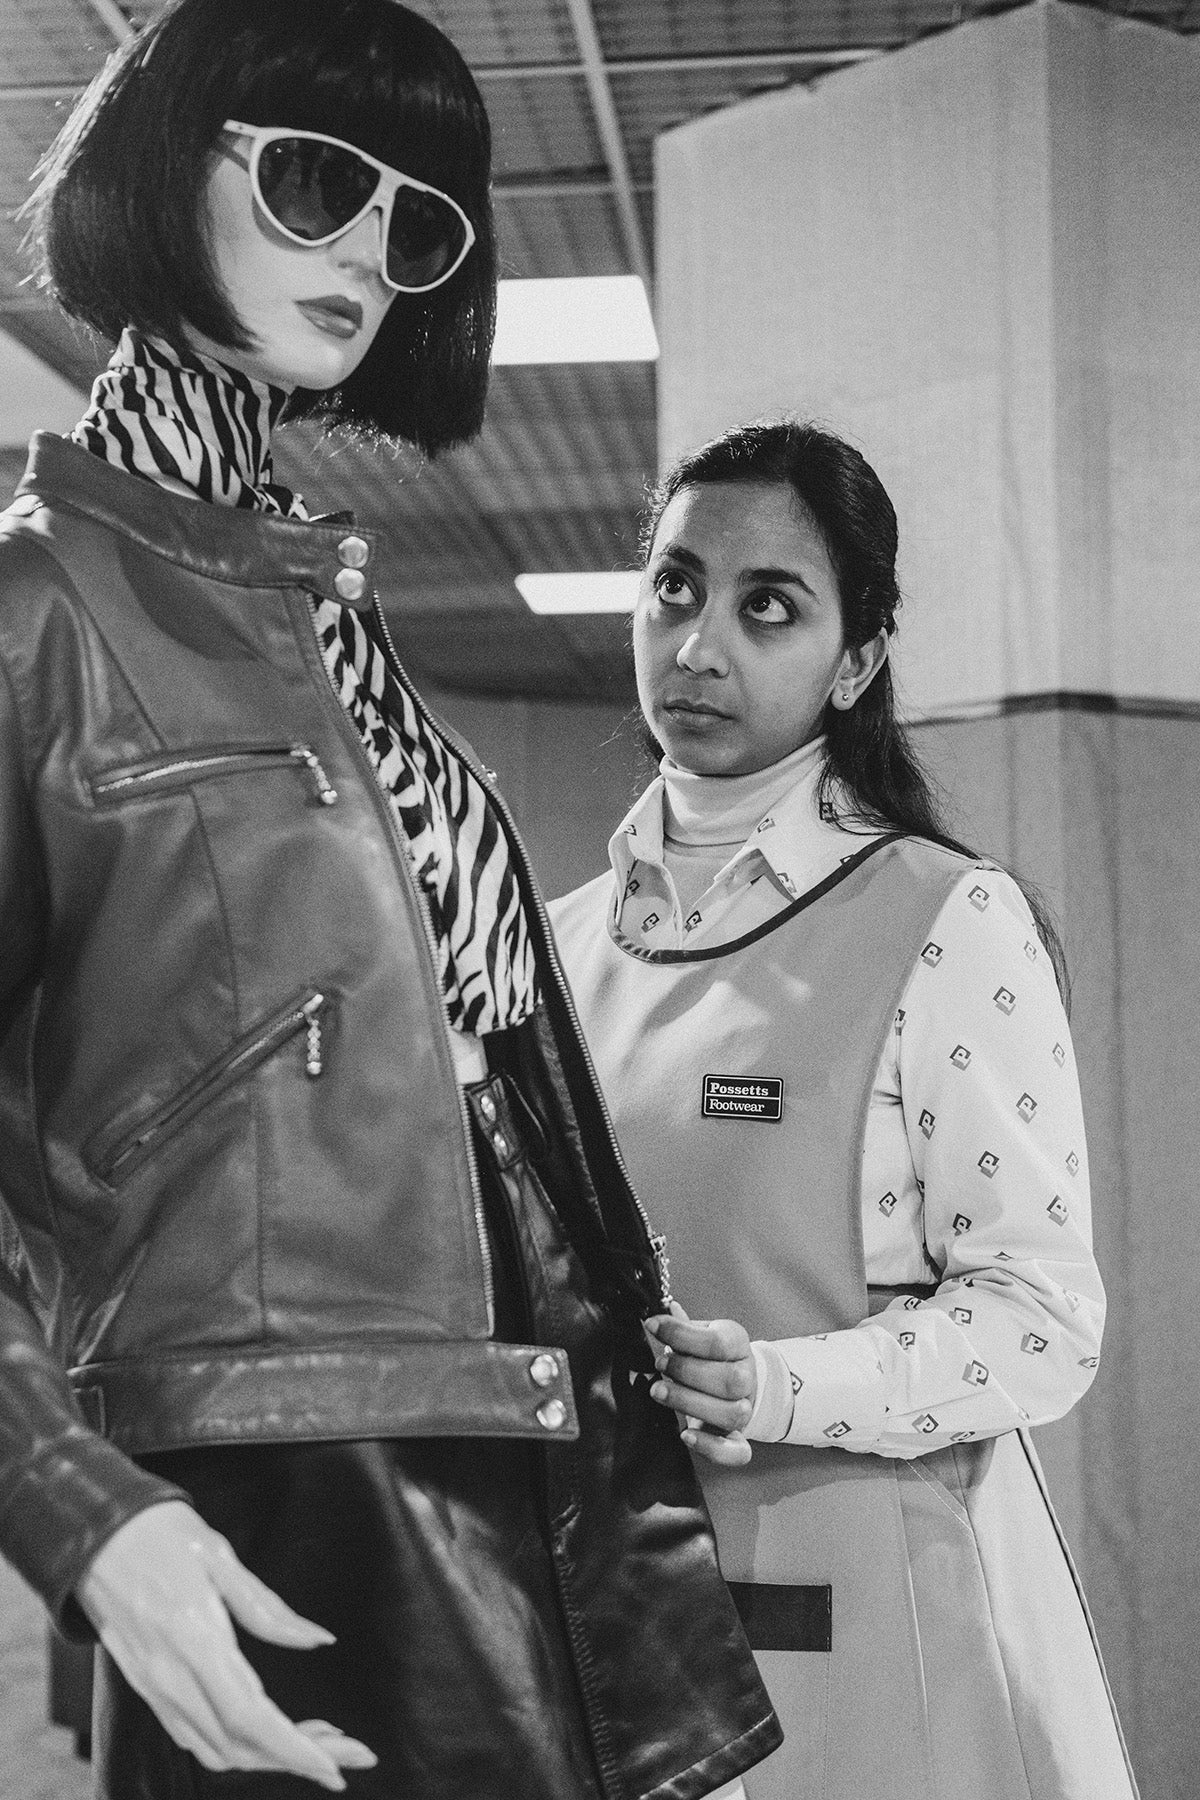 Black and white photograph by David Hurn showing Black Mirror star Anjana Vasan wearing a bib, a collared shirt, and her long hair pinned back, looking up at a mannequin wearing a leather cropped jacket and zebra print scarf